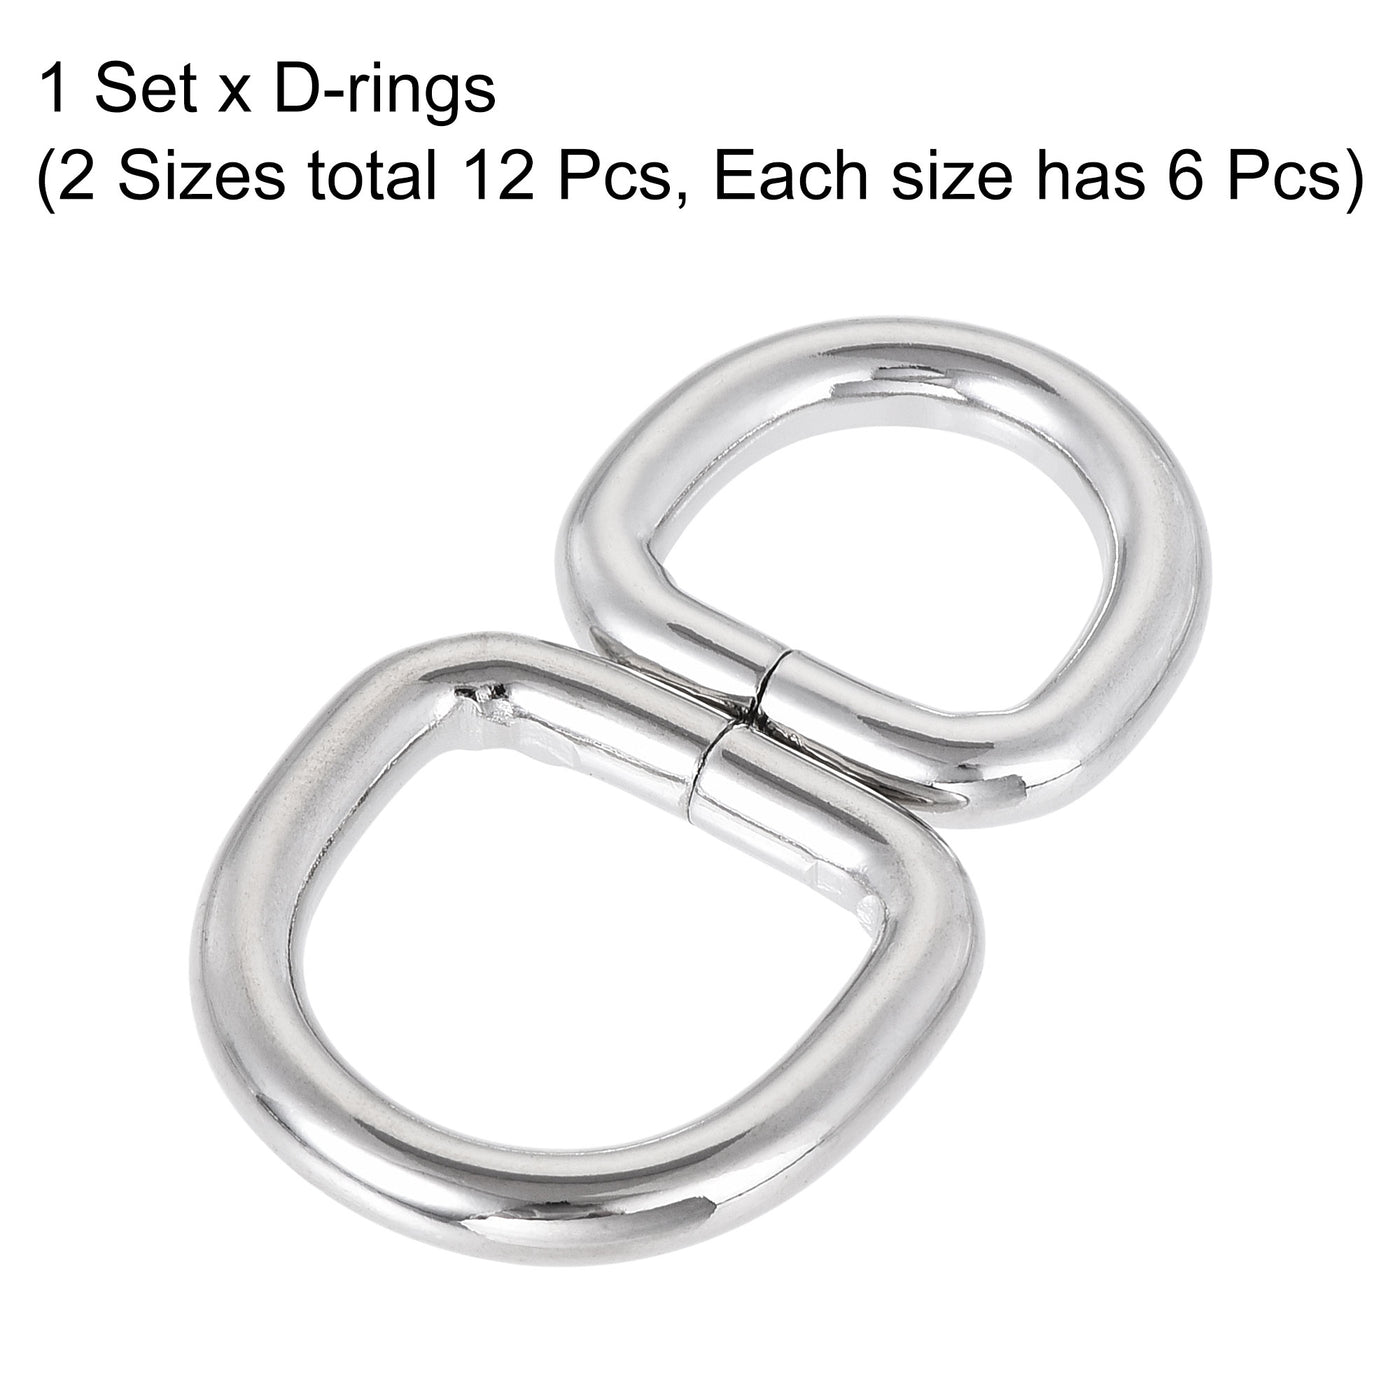 uxcell Uxcell Metal D Ring 0.63"(16mm) 0.79"(20mm) D-Rings Buckle Silver Tone, Total 12pcs